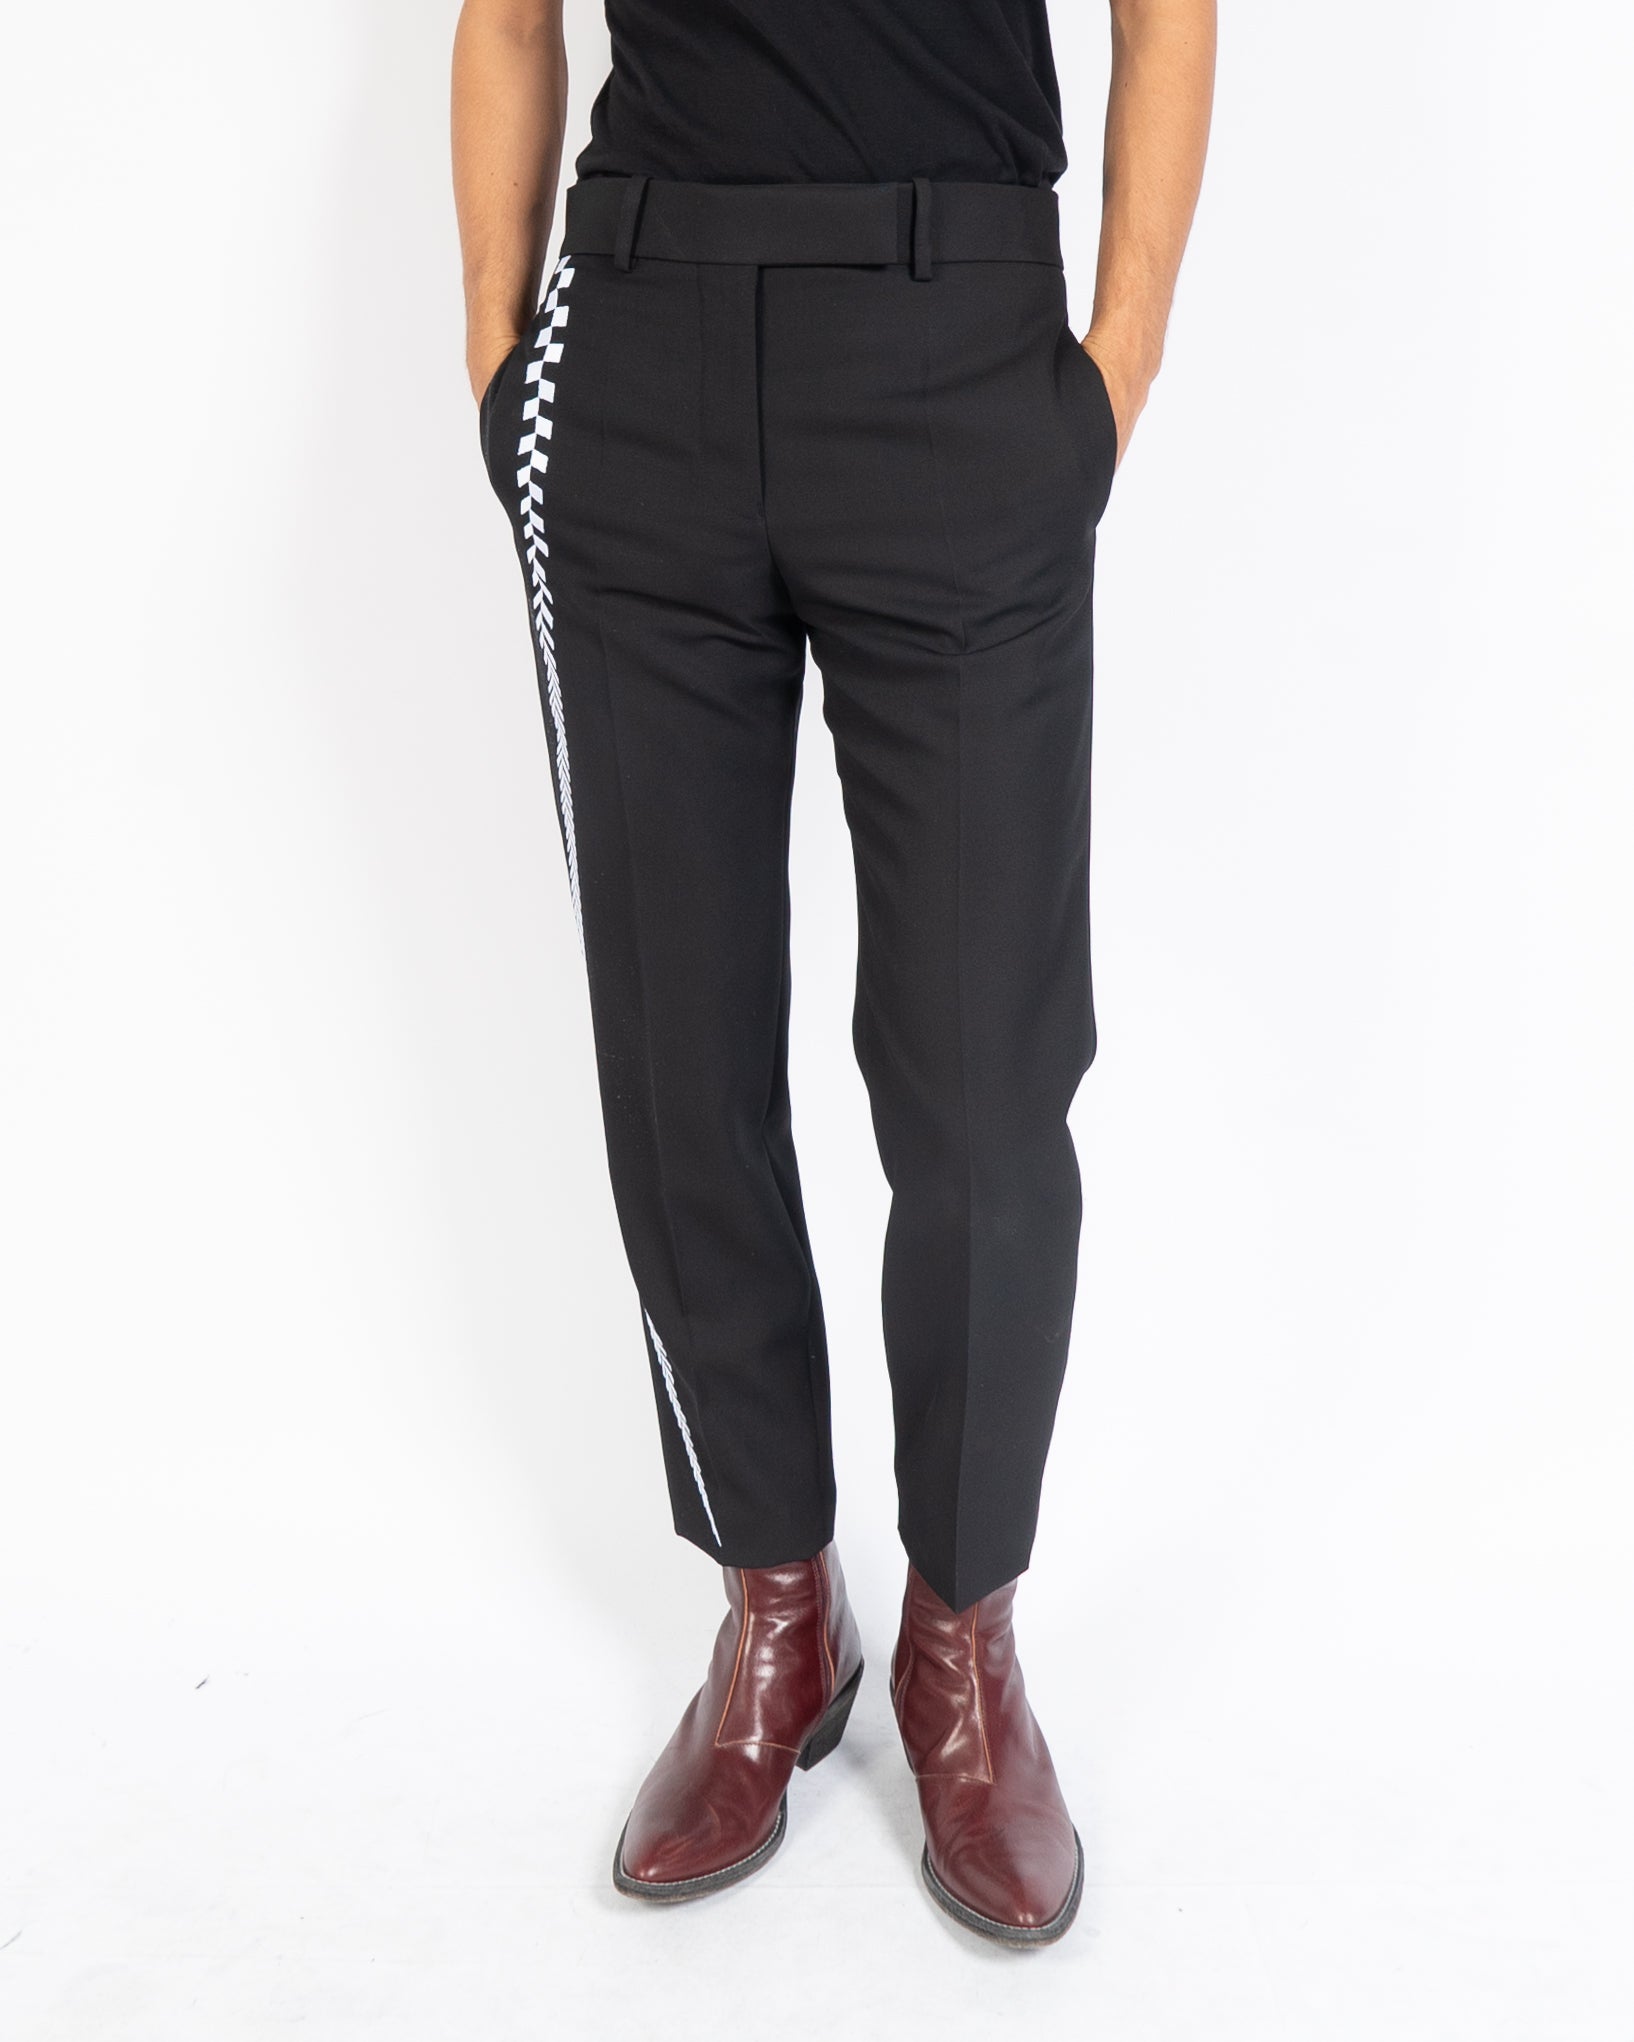 FW19 Embroidered Miles Black Trousers